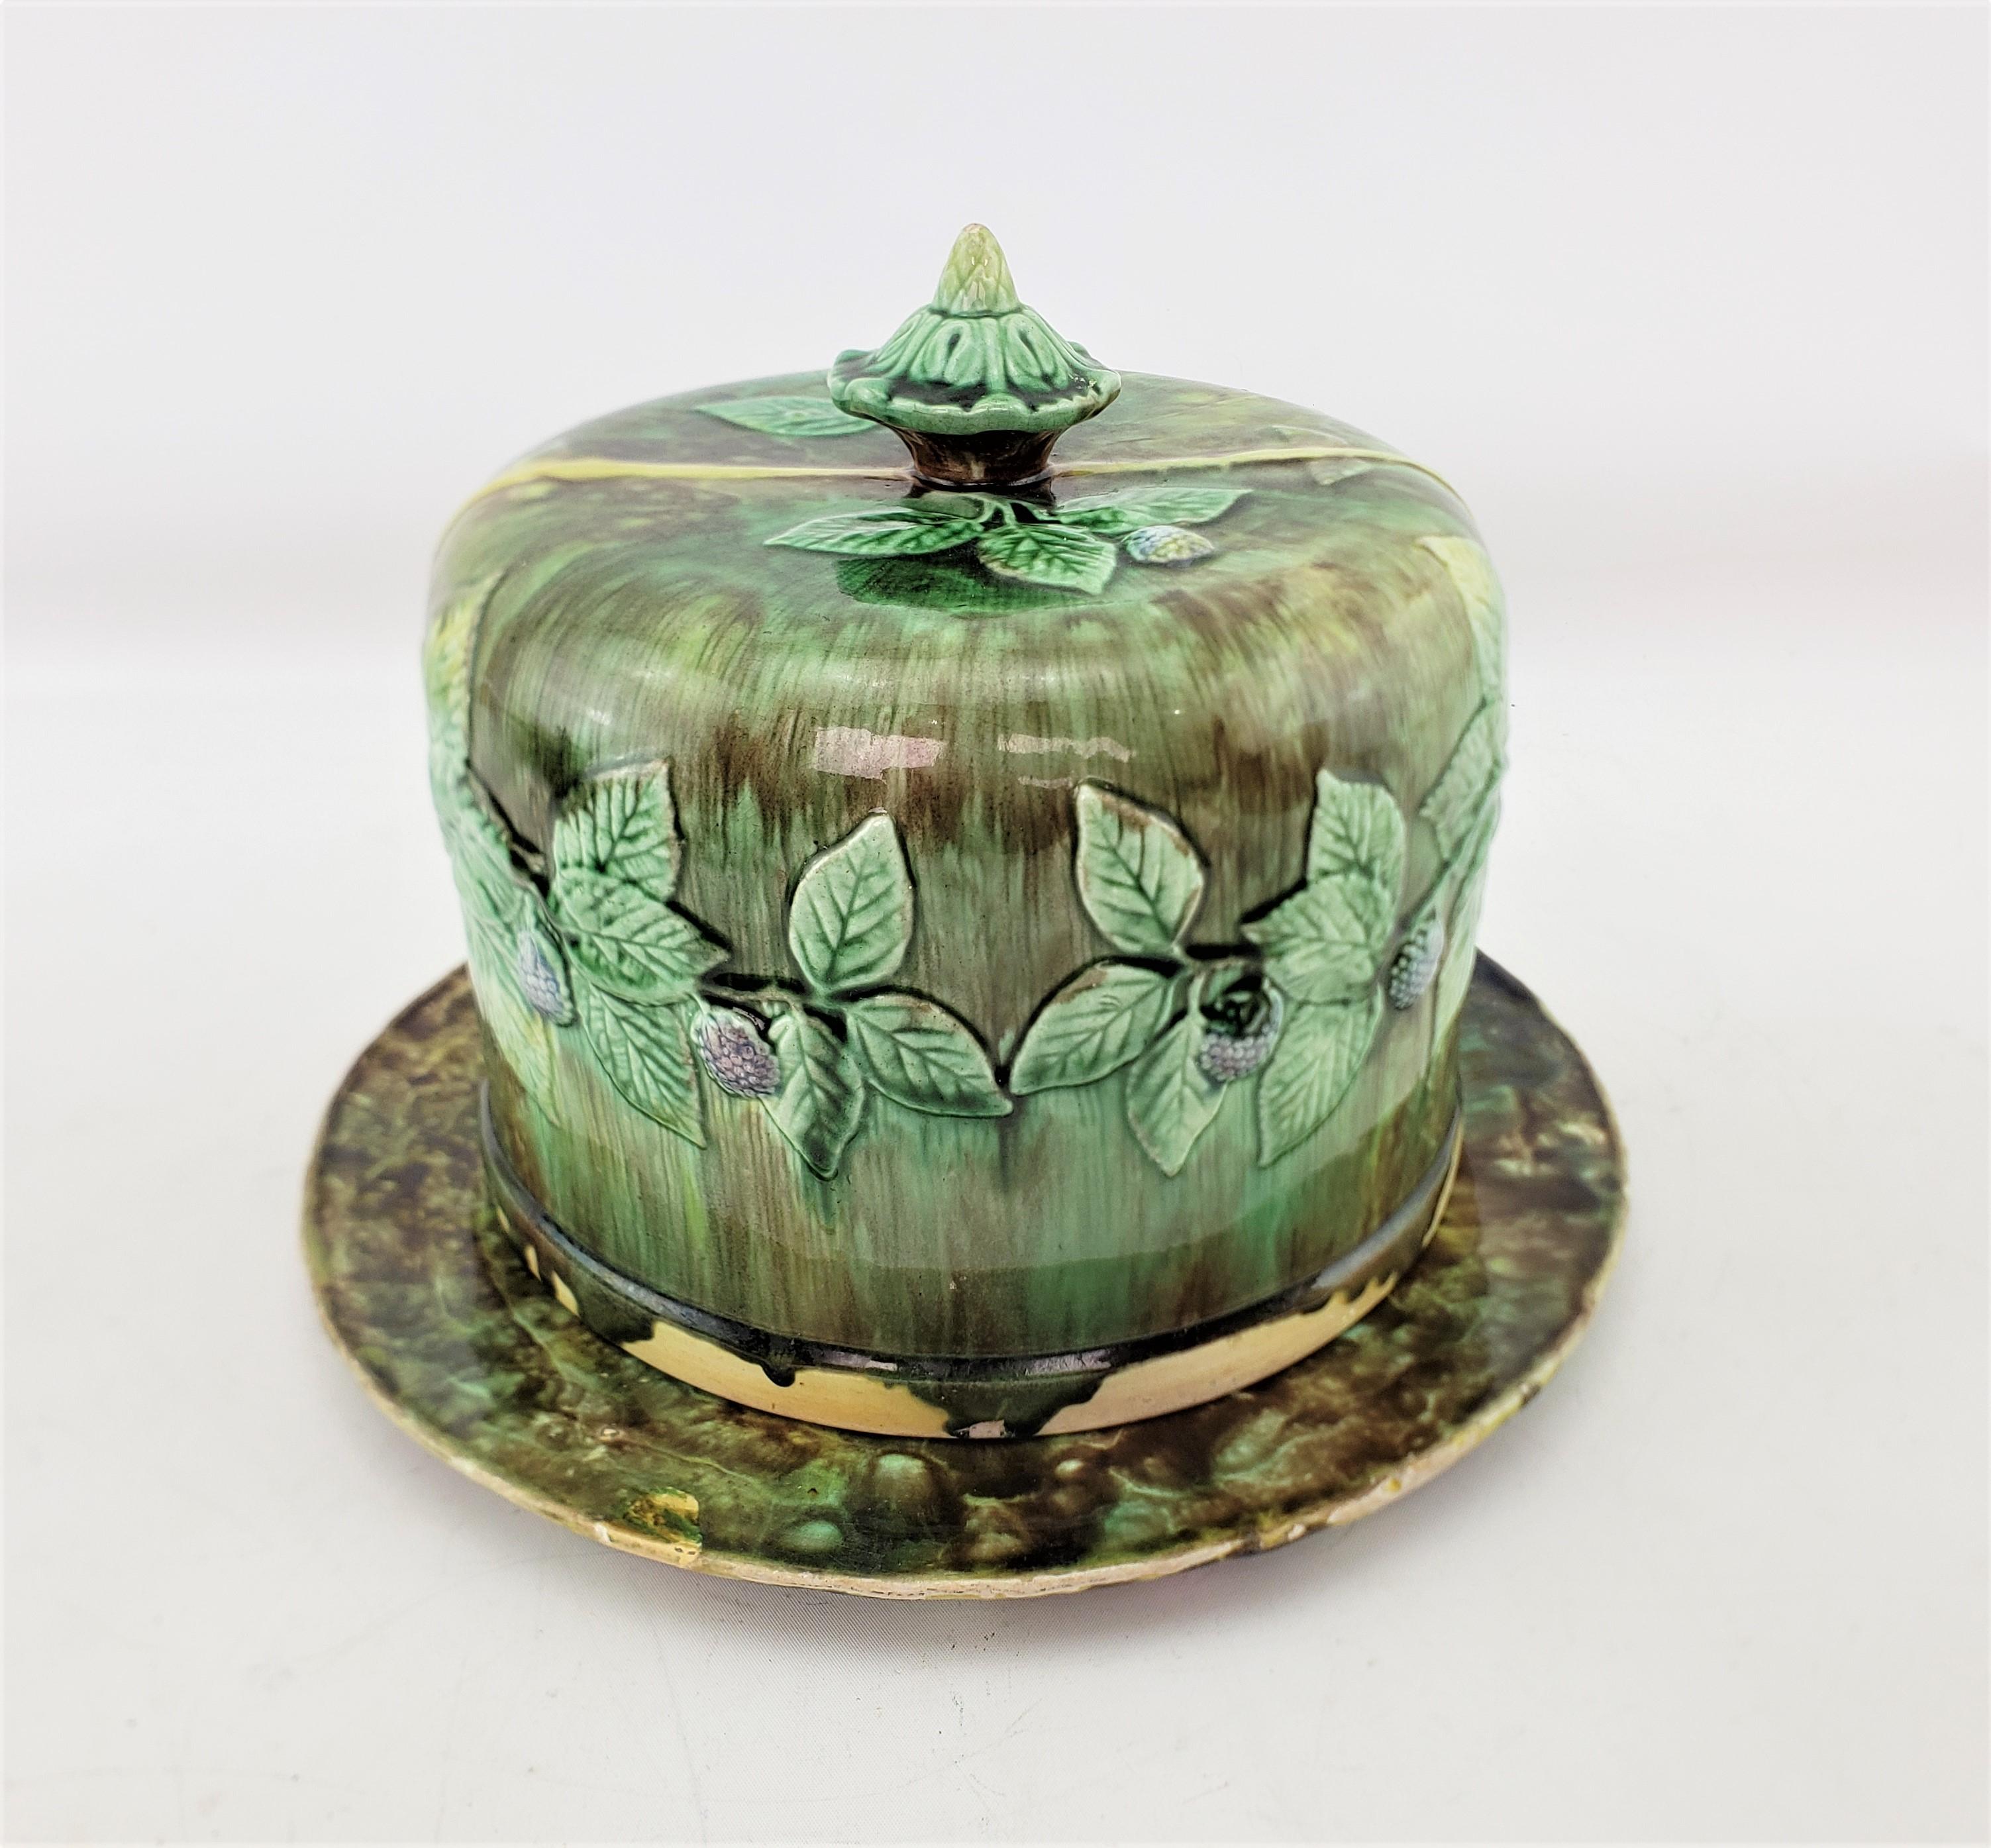 19th Century Large Antique Majolica Covered Cheese Server or Dome with Leaf & Berry Decor For Sale